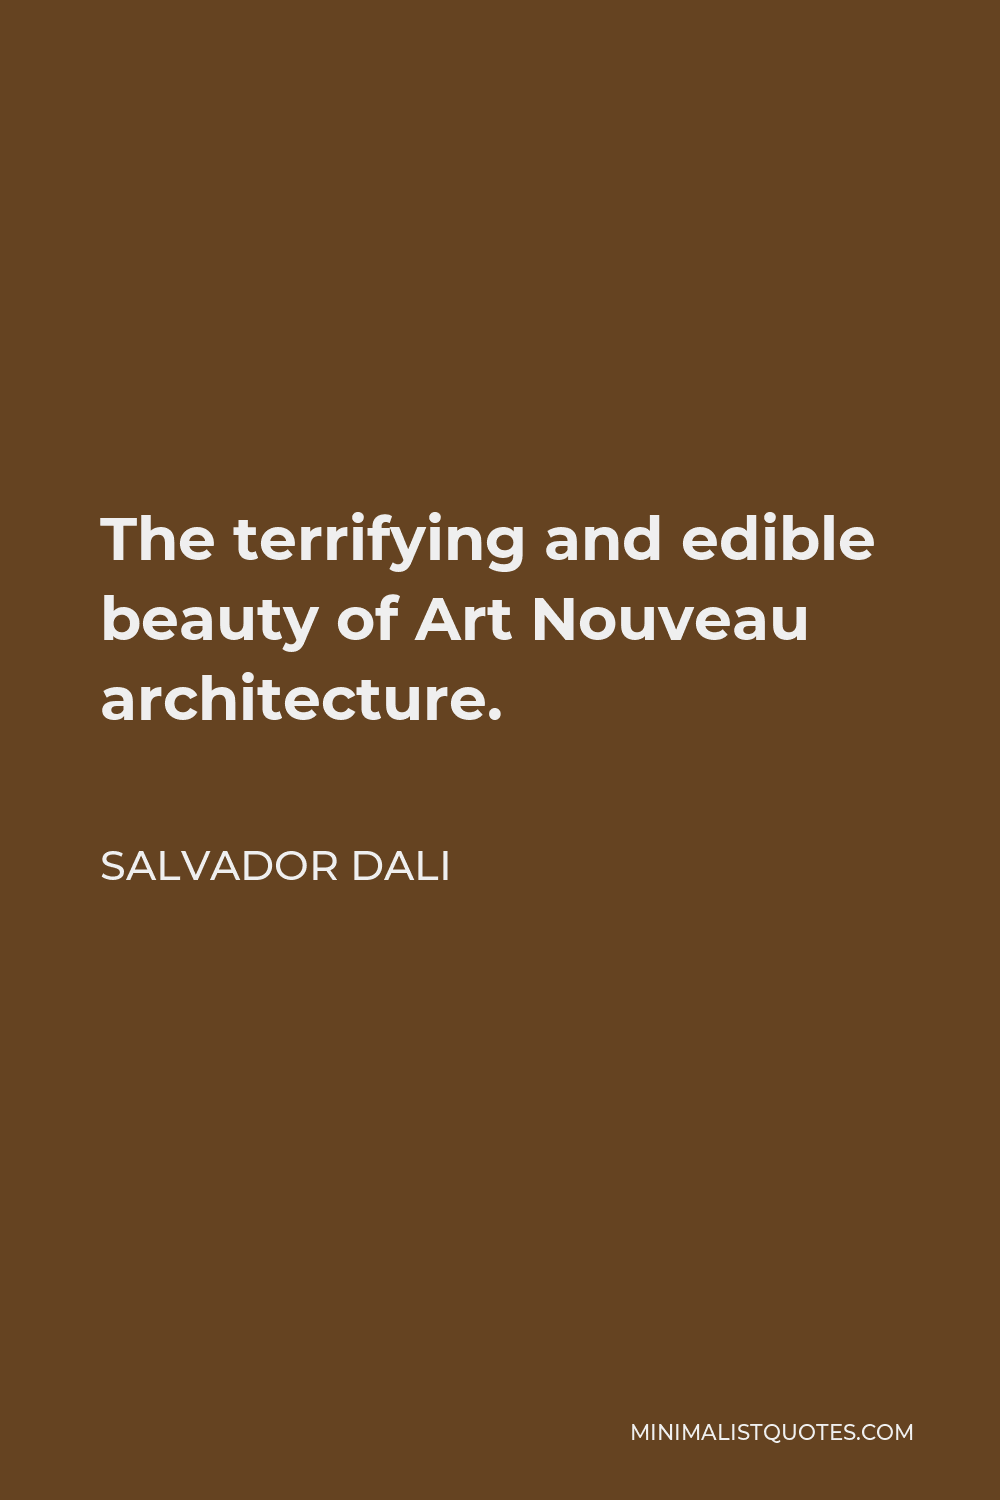 Salvador Dali Quote - The terrifying and edible beauty of Art Nouveau architecture.